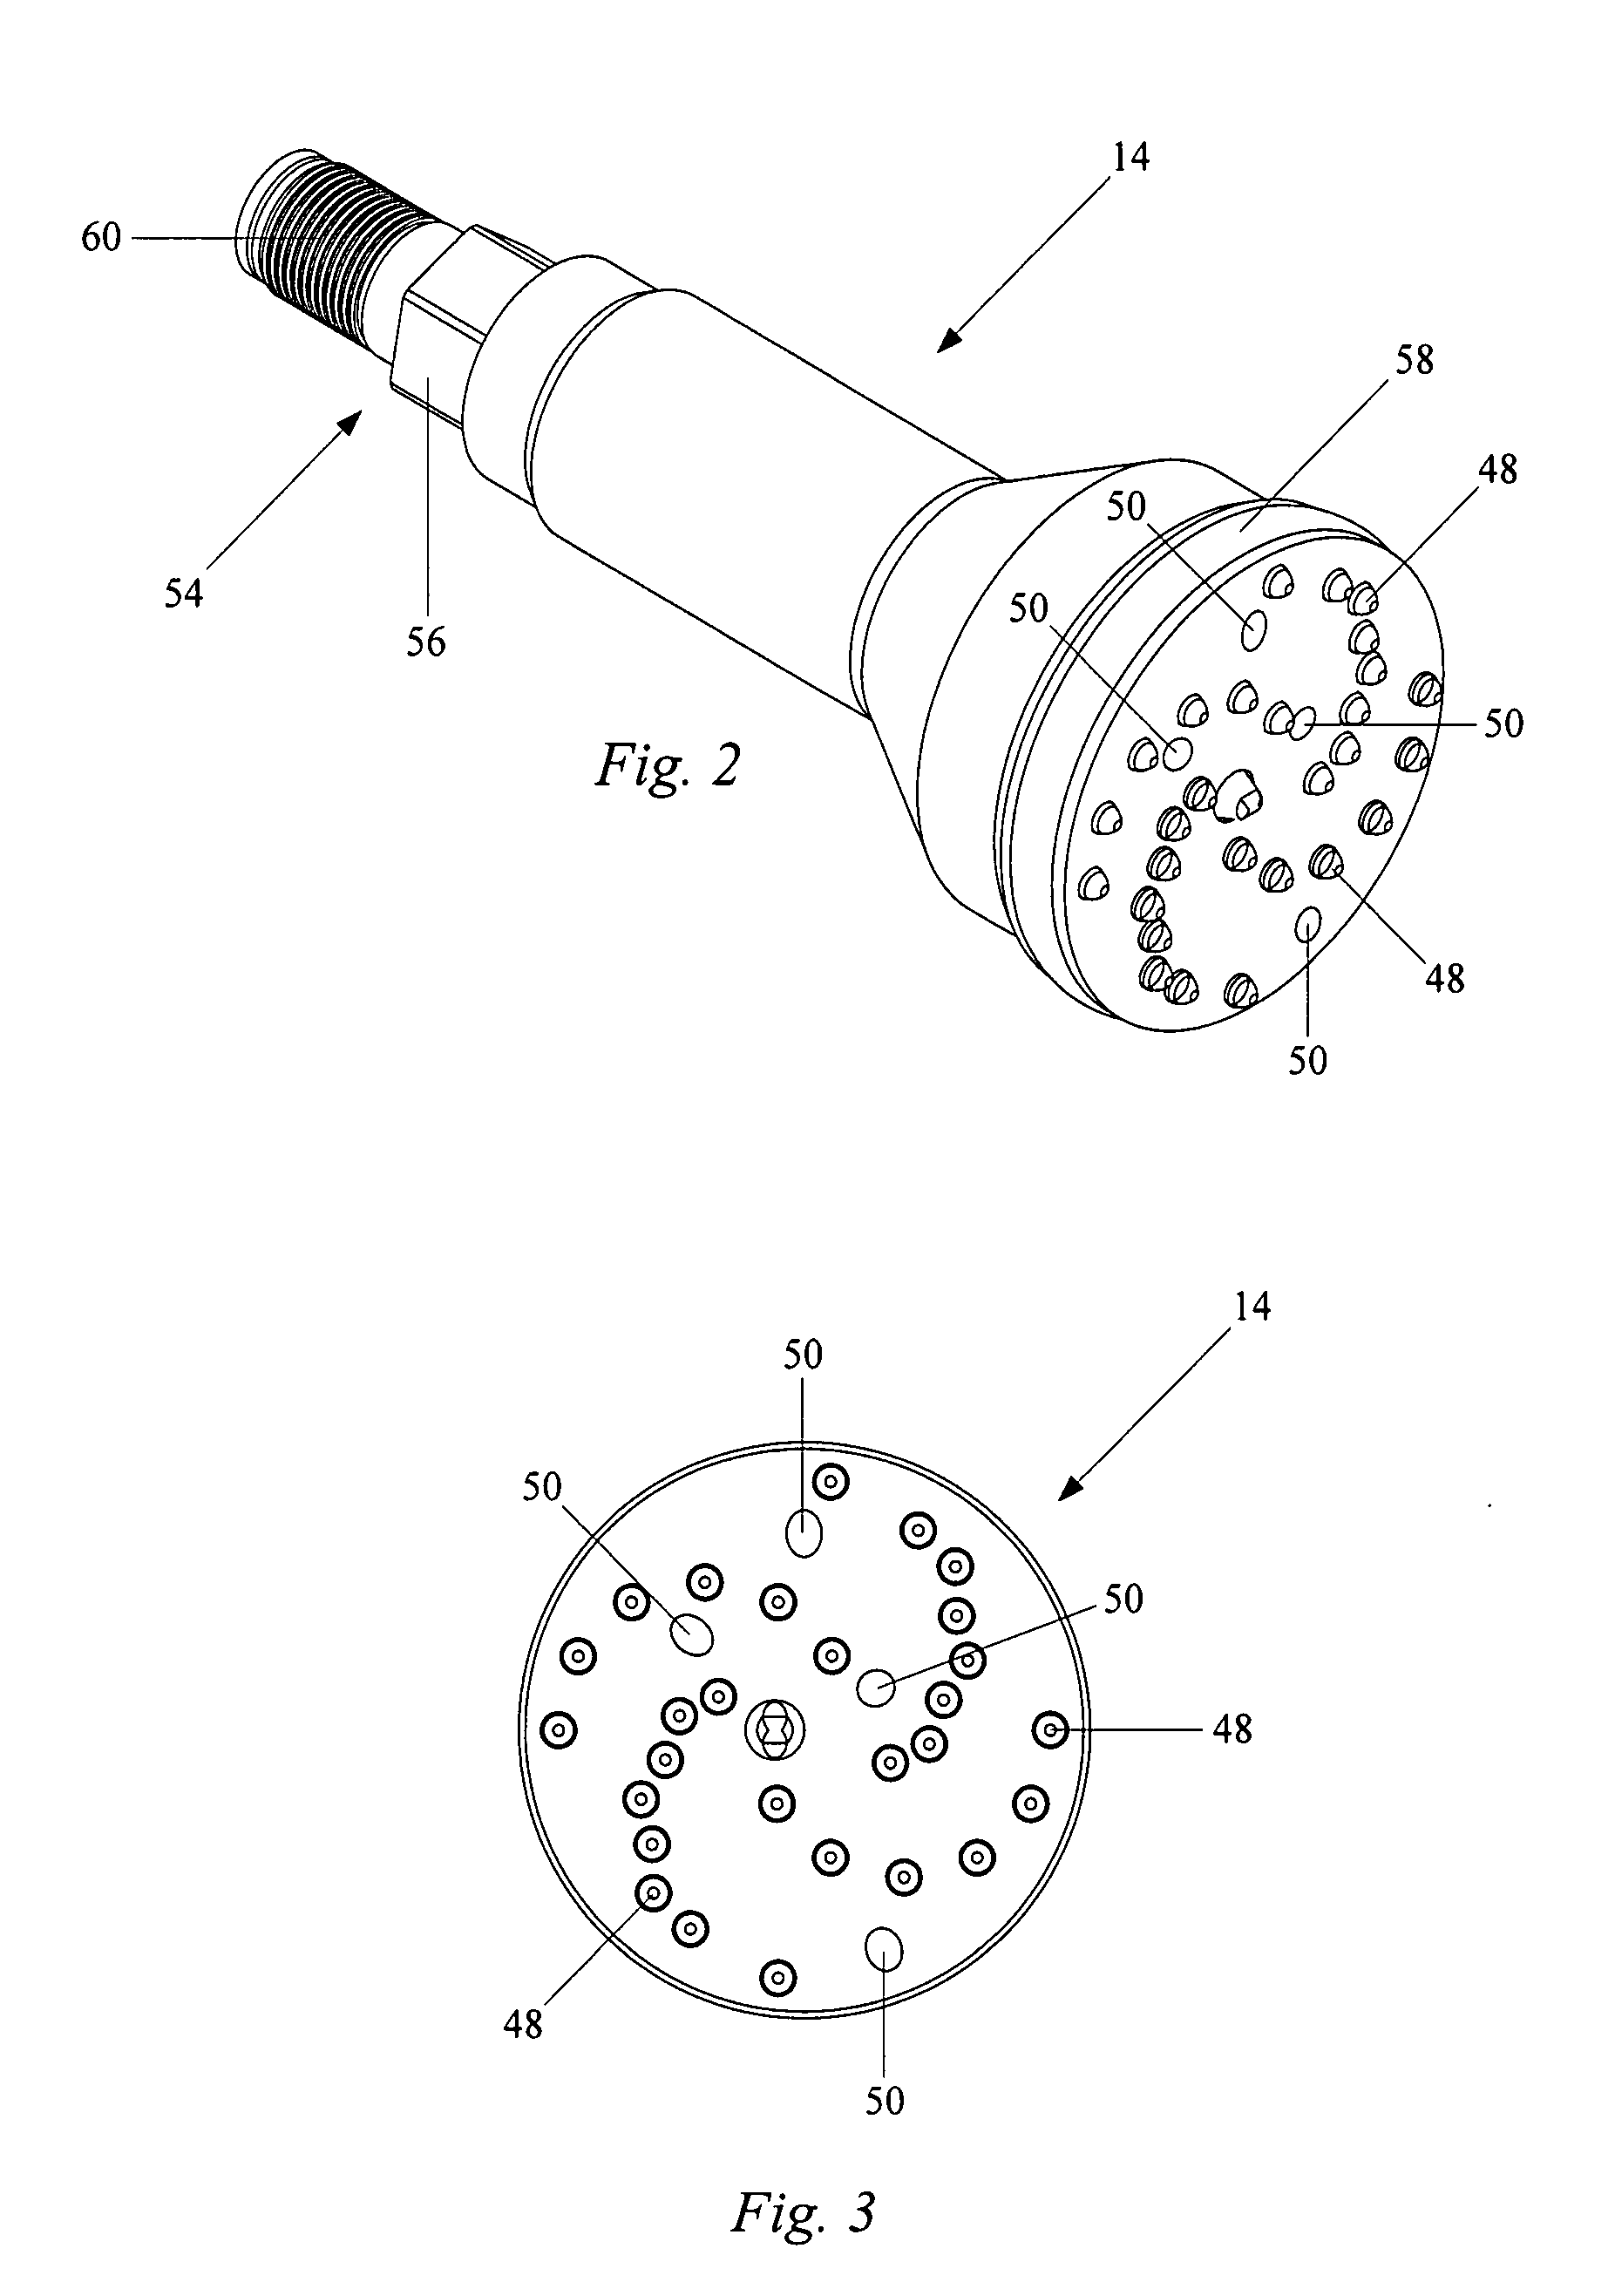 Method and apparatus for removing tuberculation from sanitary water pipelines